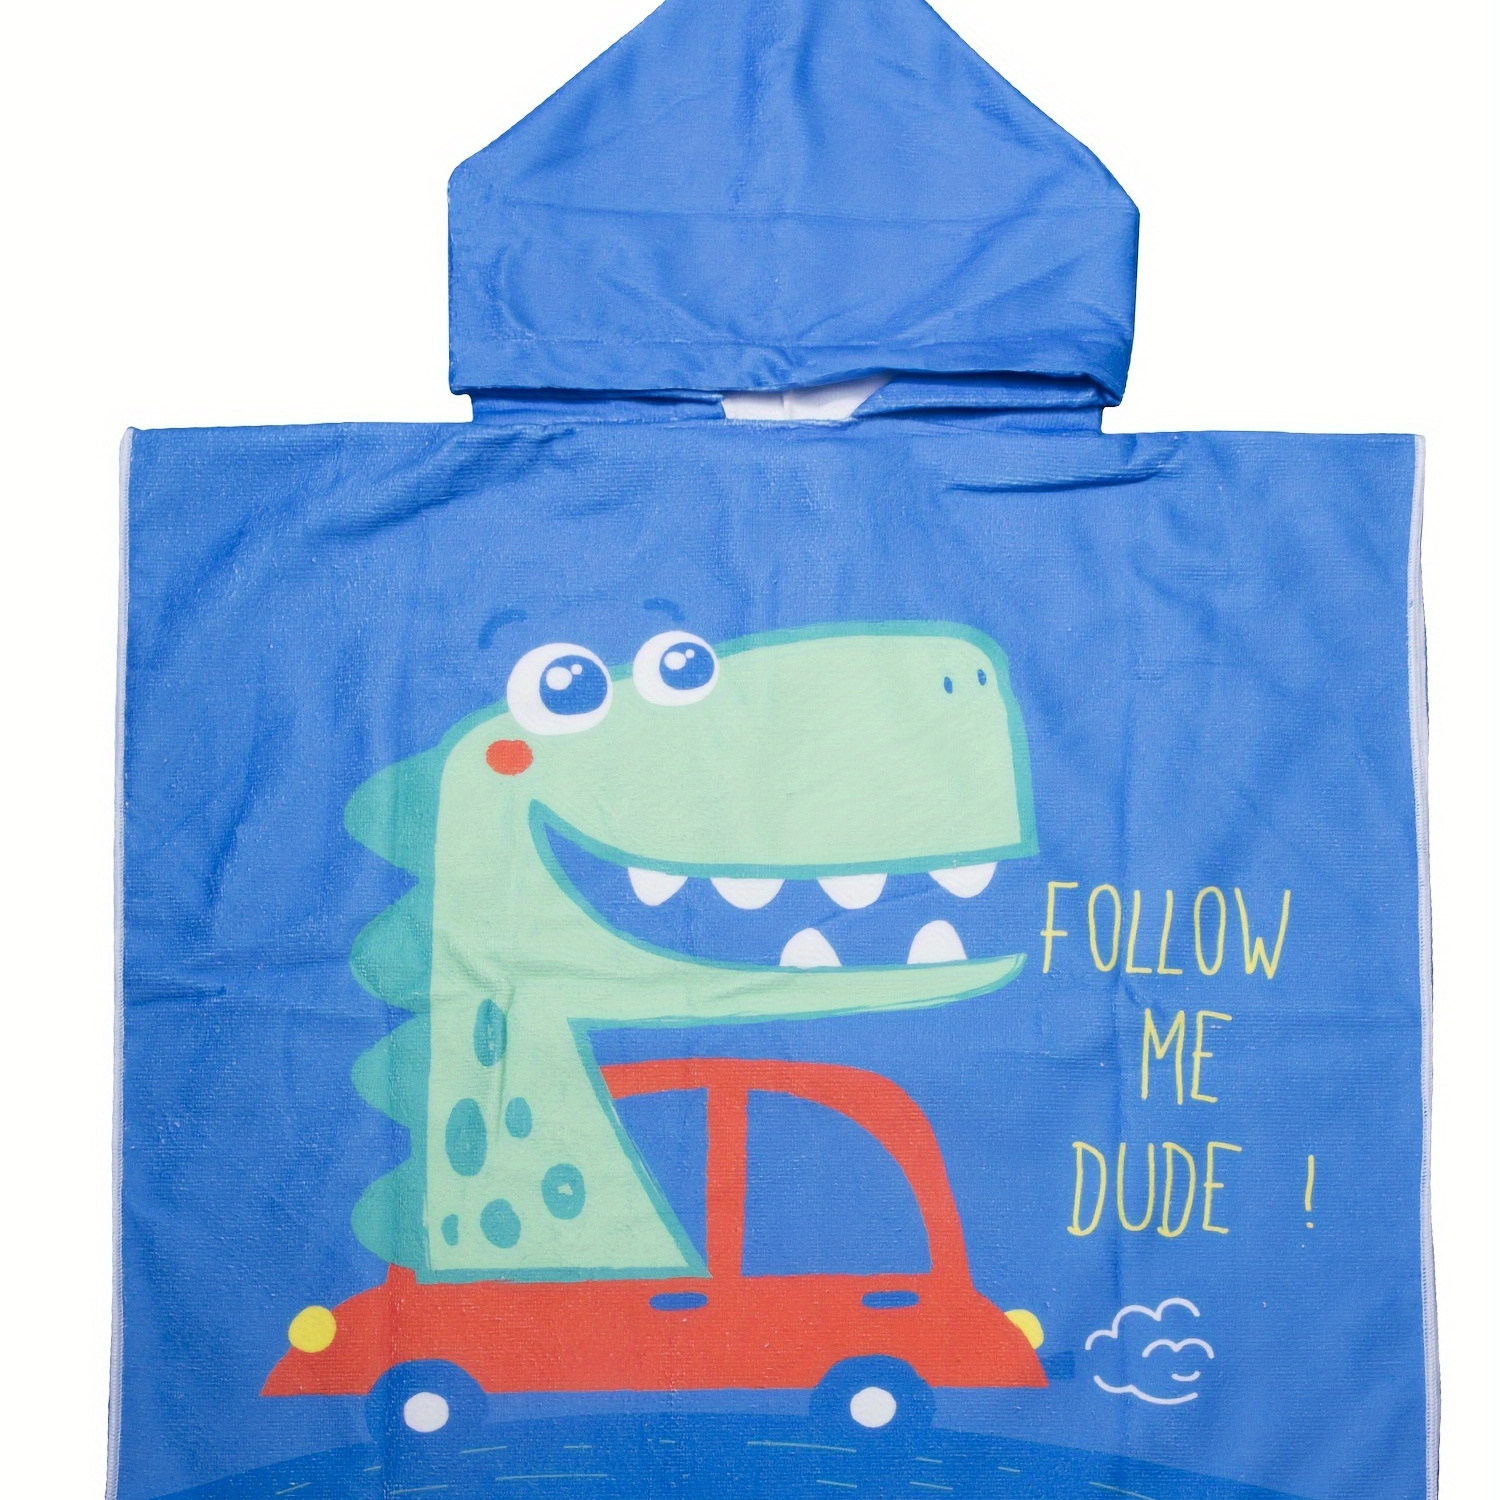 

1pc Cartoon Animal Multi-functional Children's Hooded Bathrobe, Lightweight Hooded Beach Towel, Soft And Comfortable Loungewear Nightgown For Pool Beach Travel Adventures